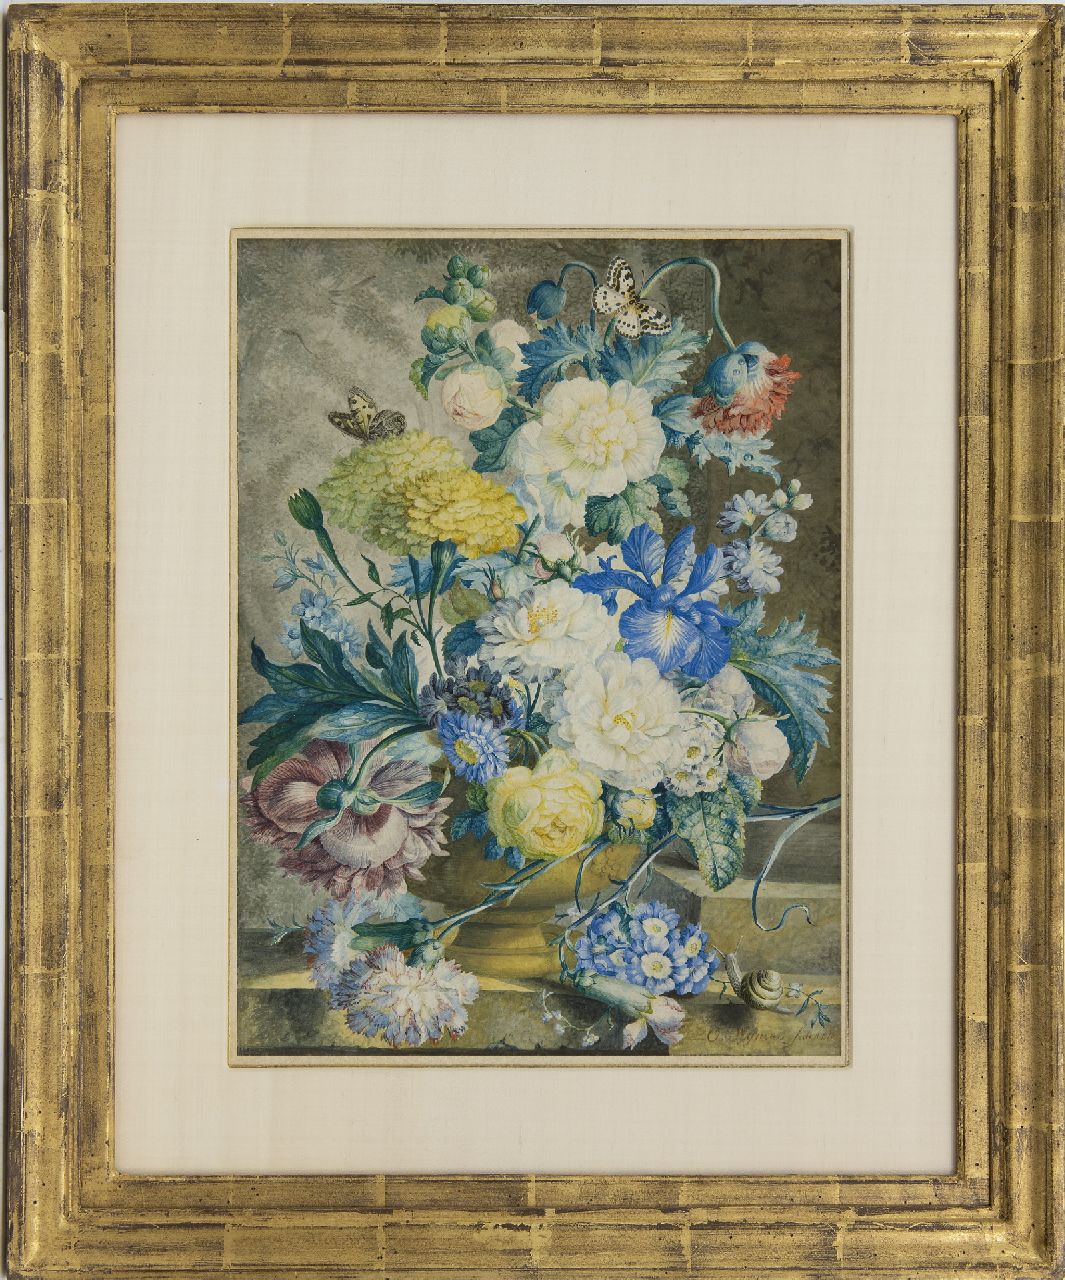 Wijnen O.  | Oswald Wijnen | Watercolours and drawings offered for sale | A flower still life, watercolour on paper 40.6 x 30.1 cm, signed l.r. and dated 1778